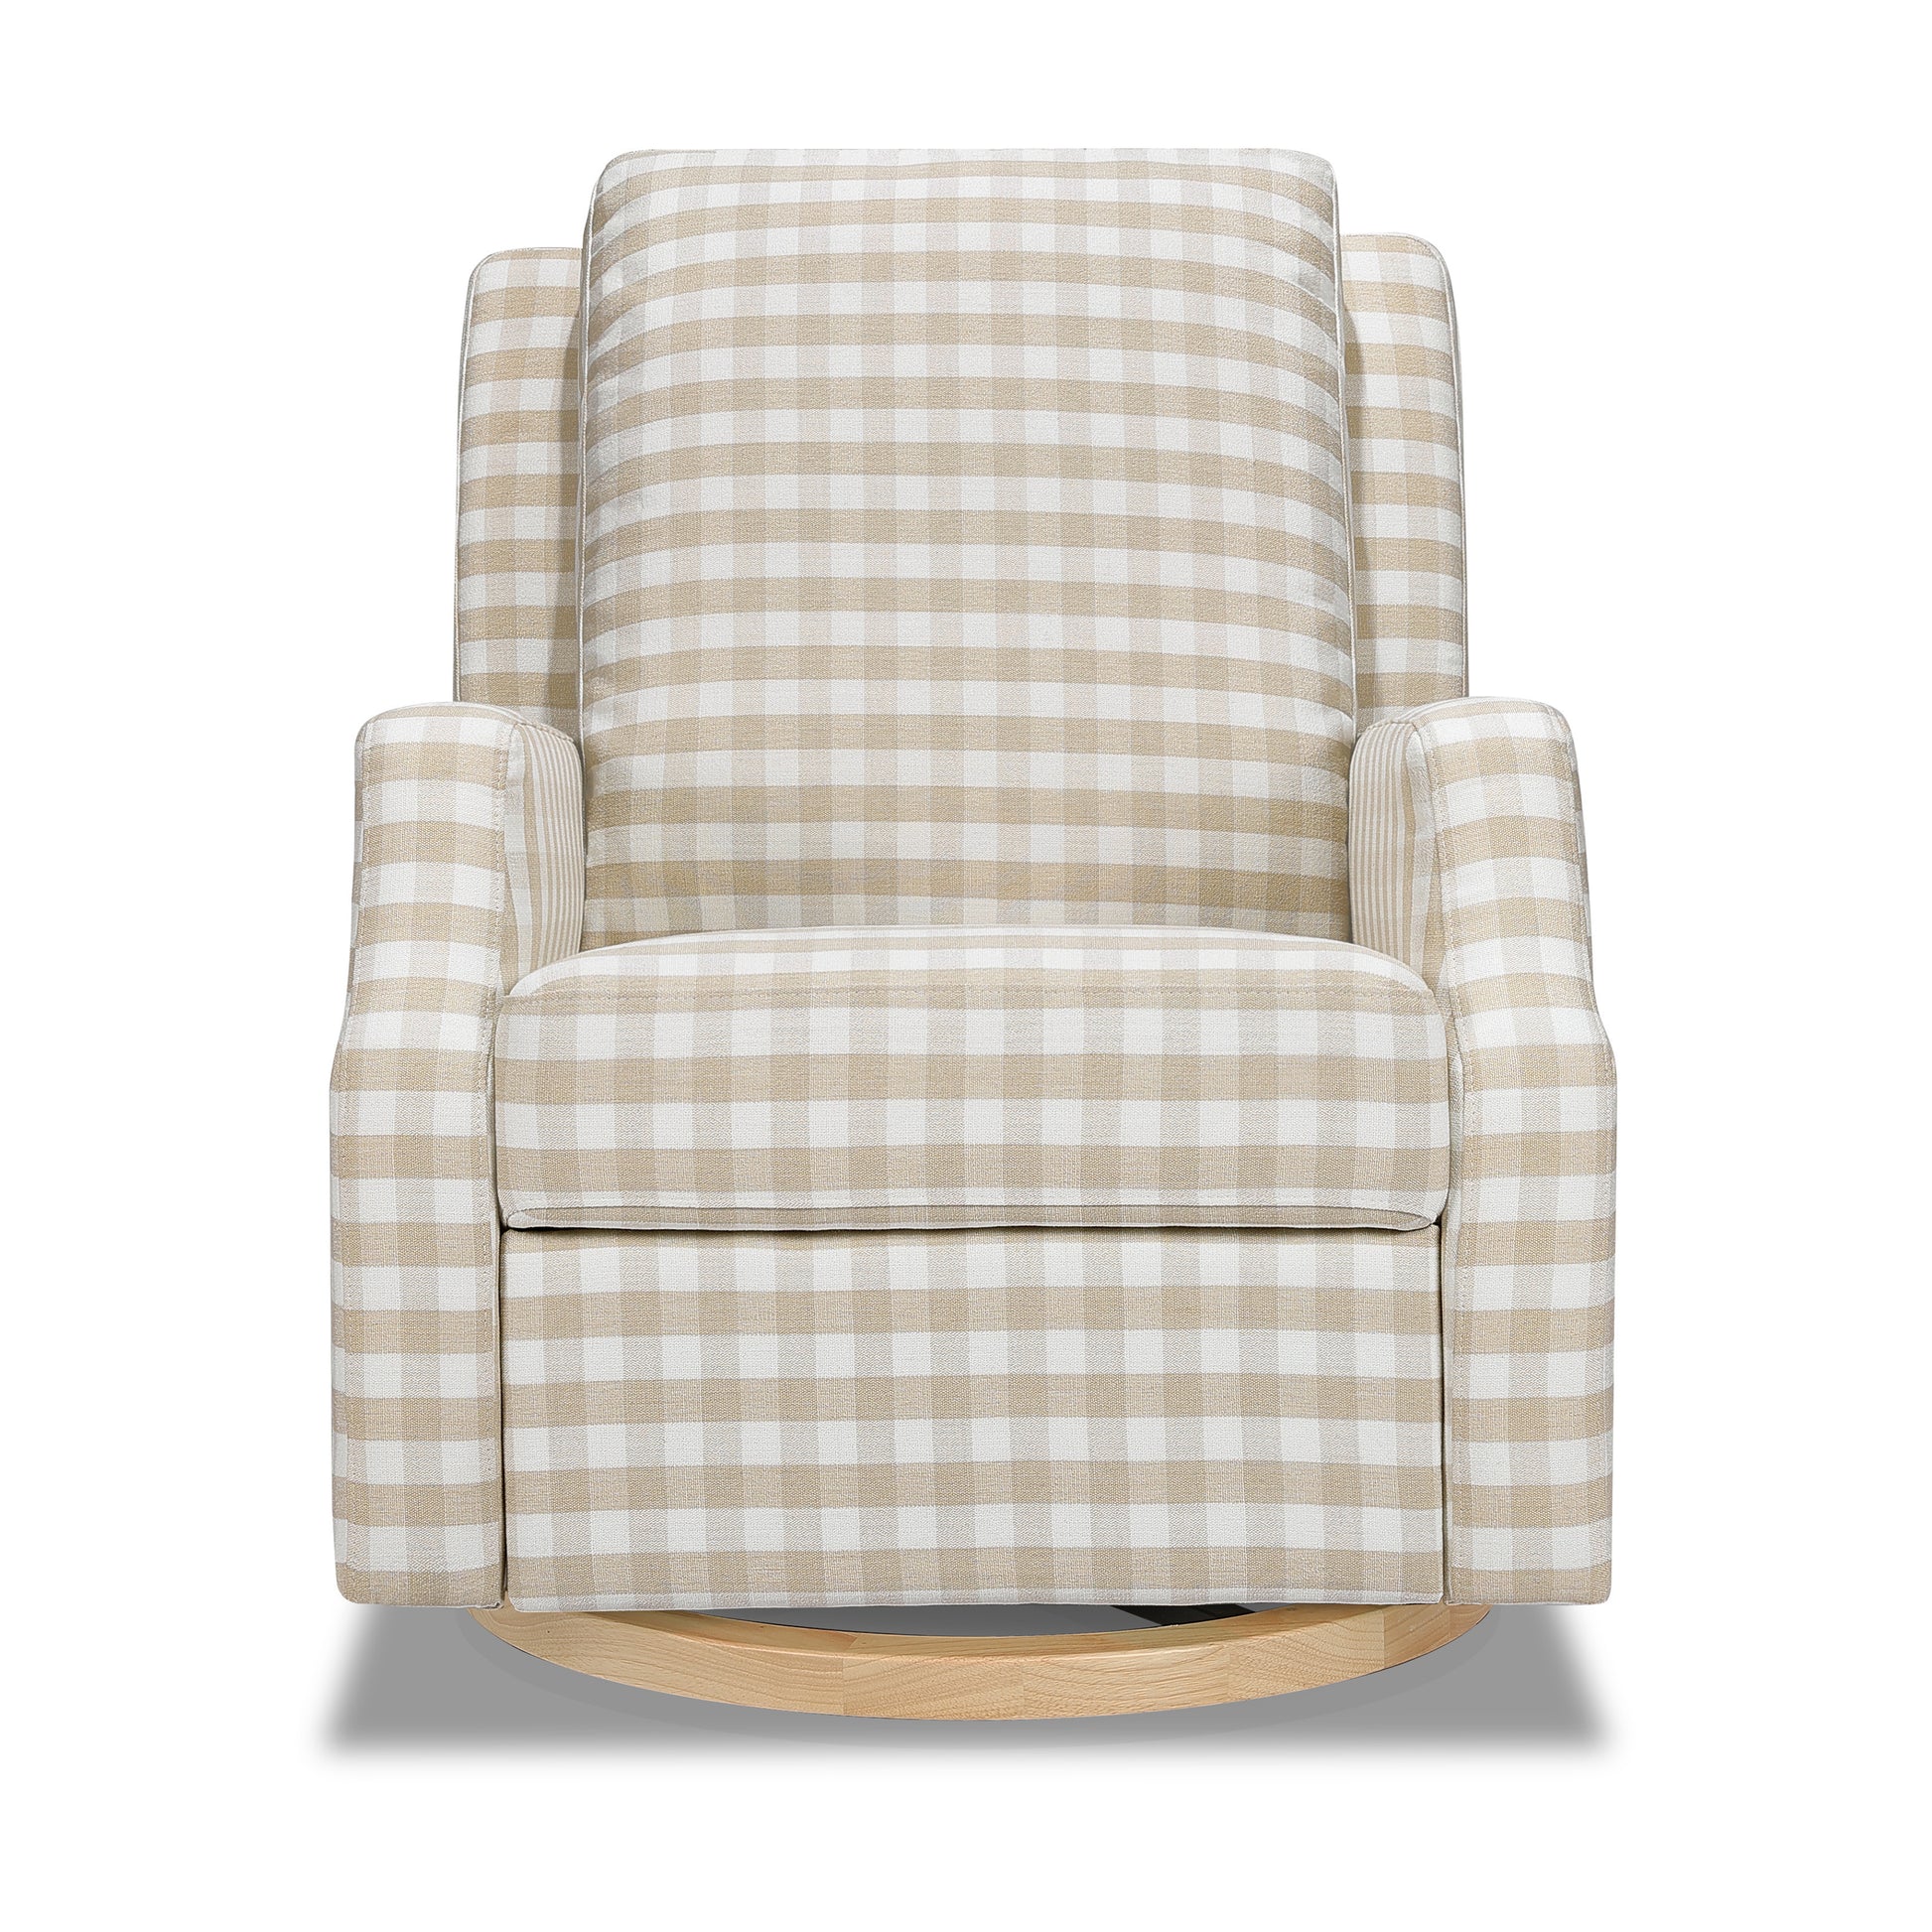 M22287TGHLB,Crewe Recliner and Swivel Glider in Tan Gingham with Light Wood Base